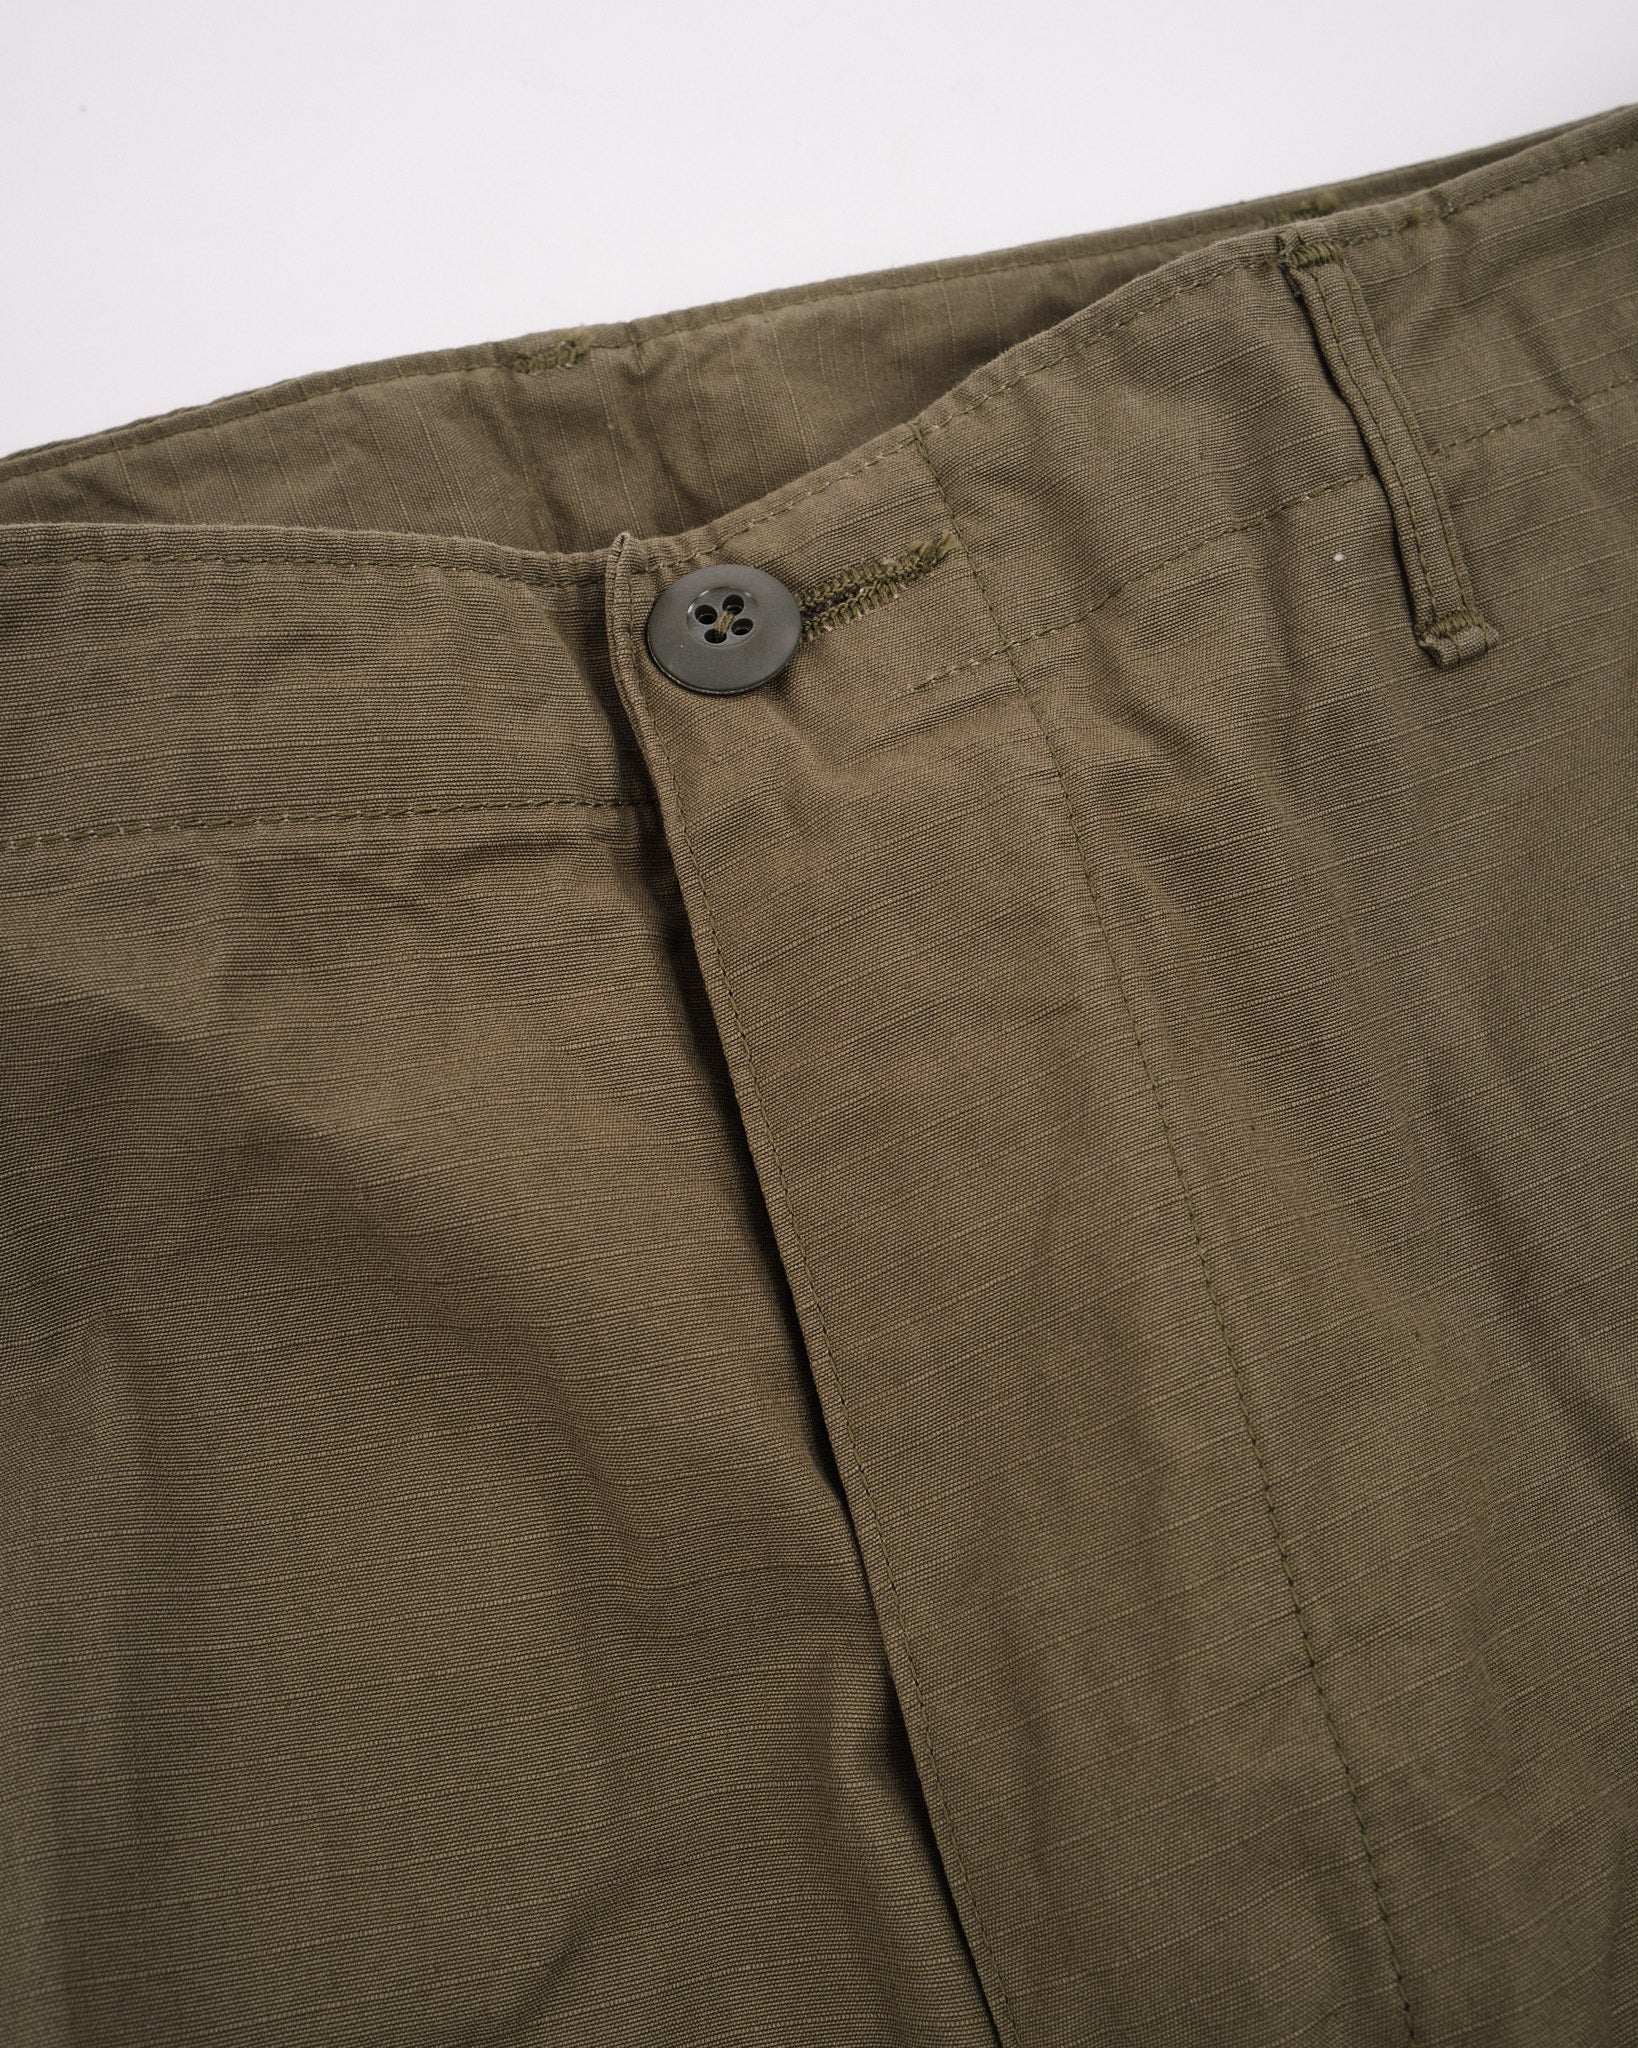 VINTAGE FIT 6 POCKETS CARGO PANTS ARMY GREEN - Meadow